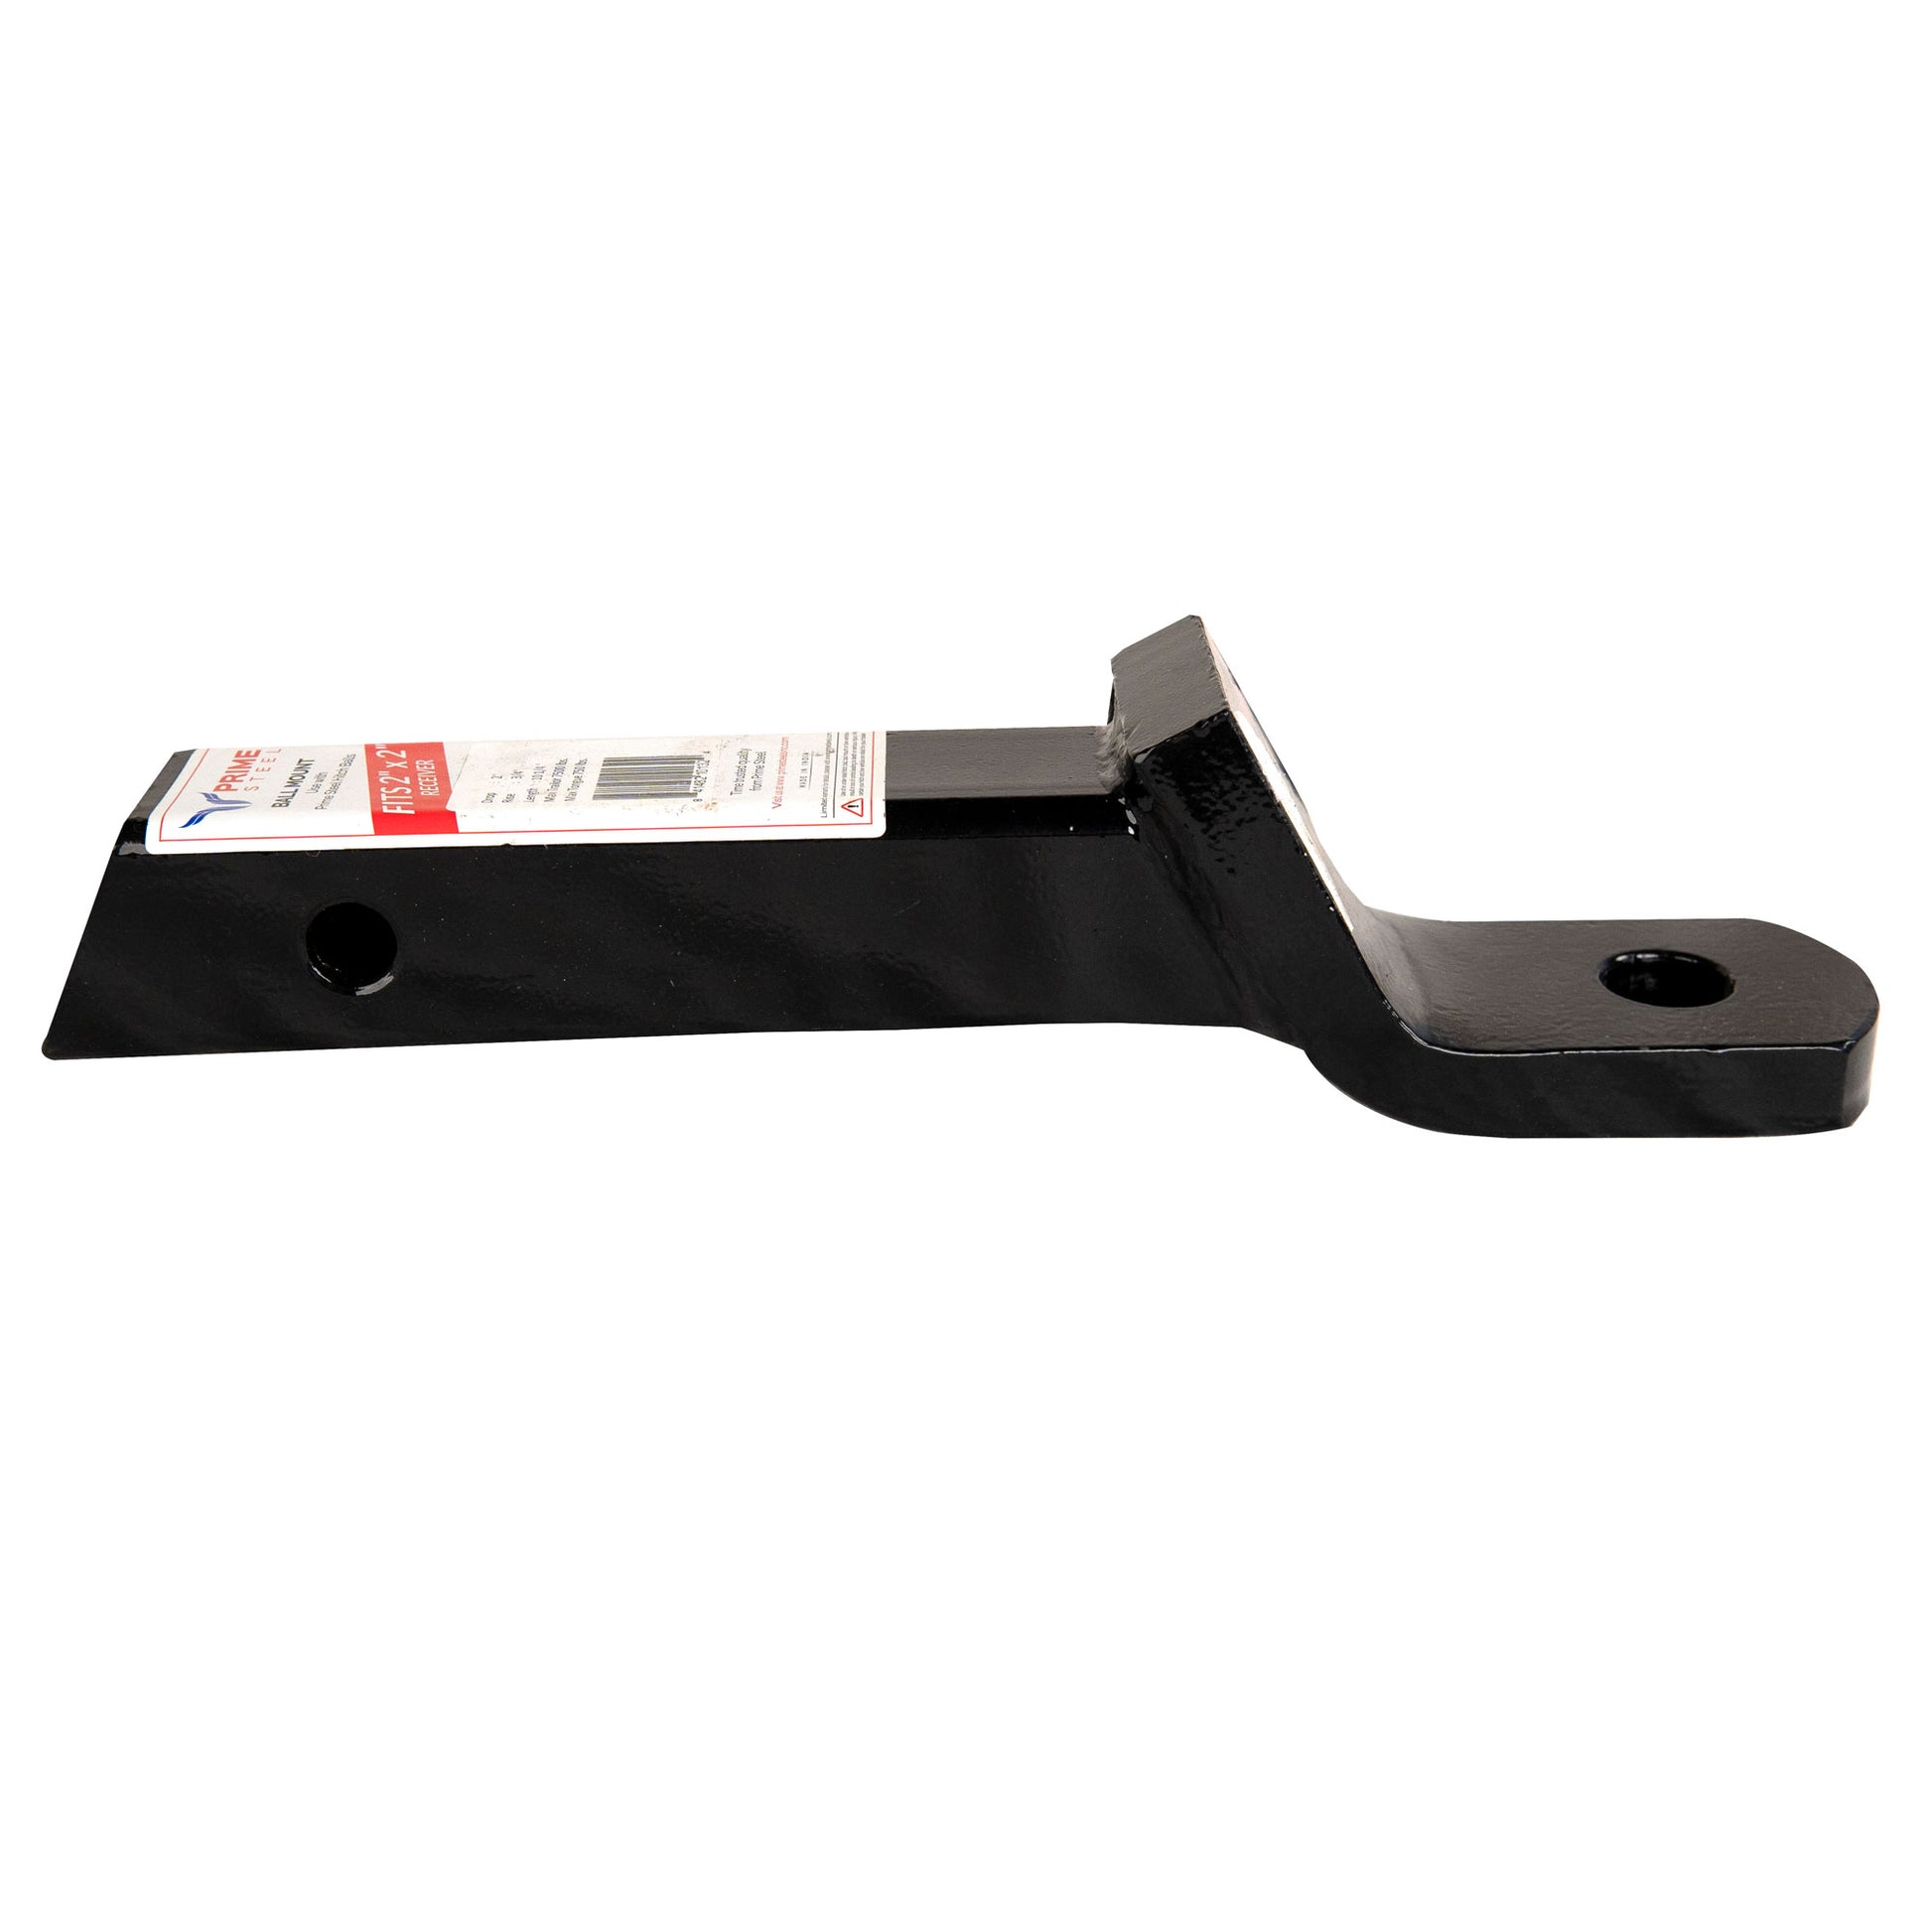 Right Angle Trailer Ball Mount 2" Drop, 3/4" Thick, 10 1/4" Right Angle Hollow, Black PS-18132 - The Trailer Parts Outlet